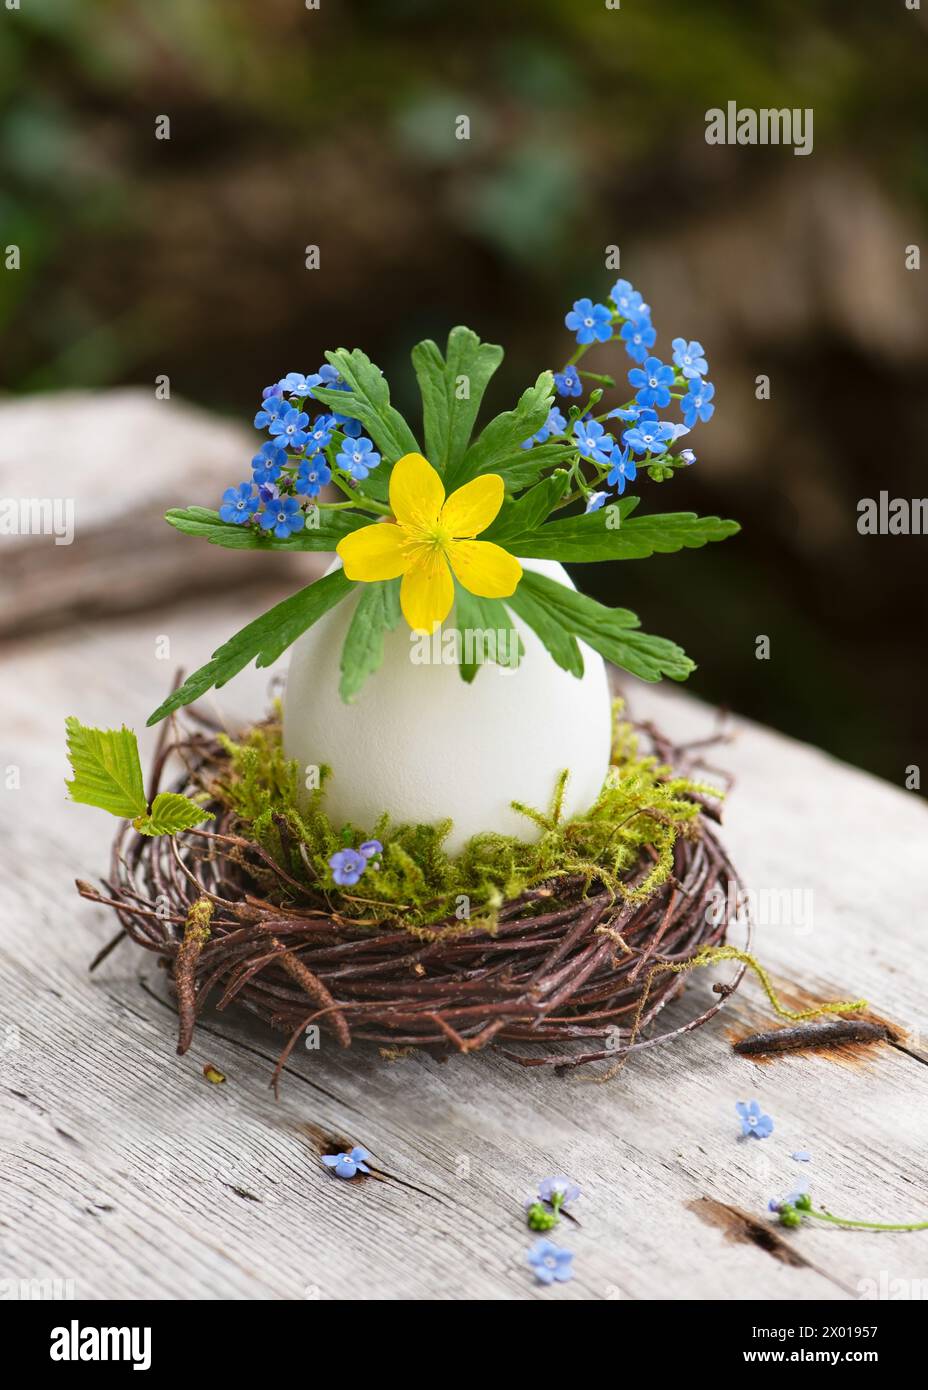 Handmade easter decoration with sweet yellow wood anemone and  forget-me-nots flowers in egg shell vase nest on a rustic garden table. Stock Photo